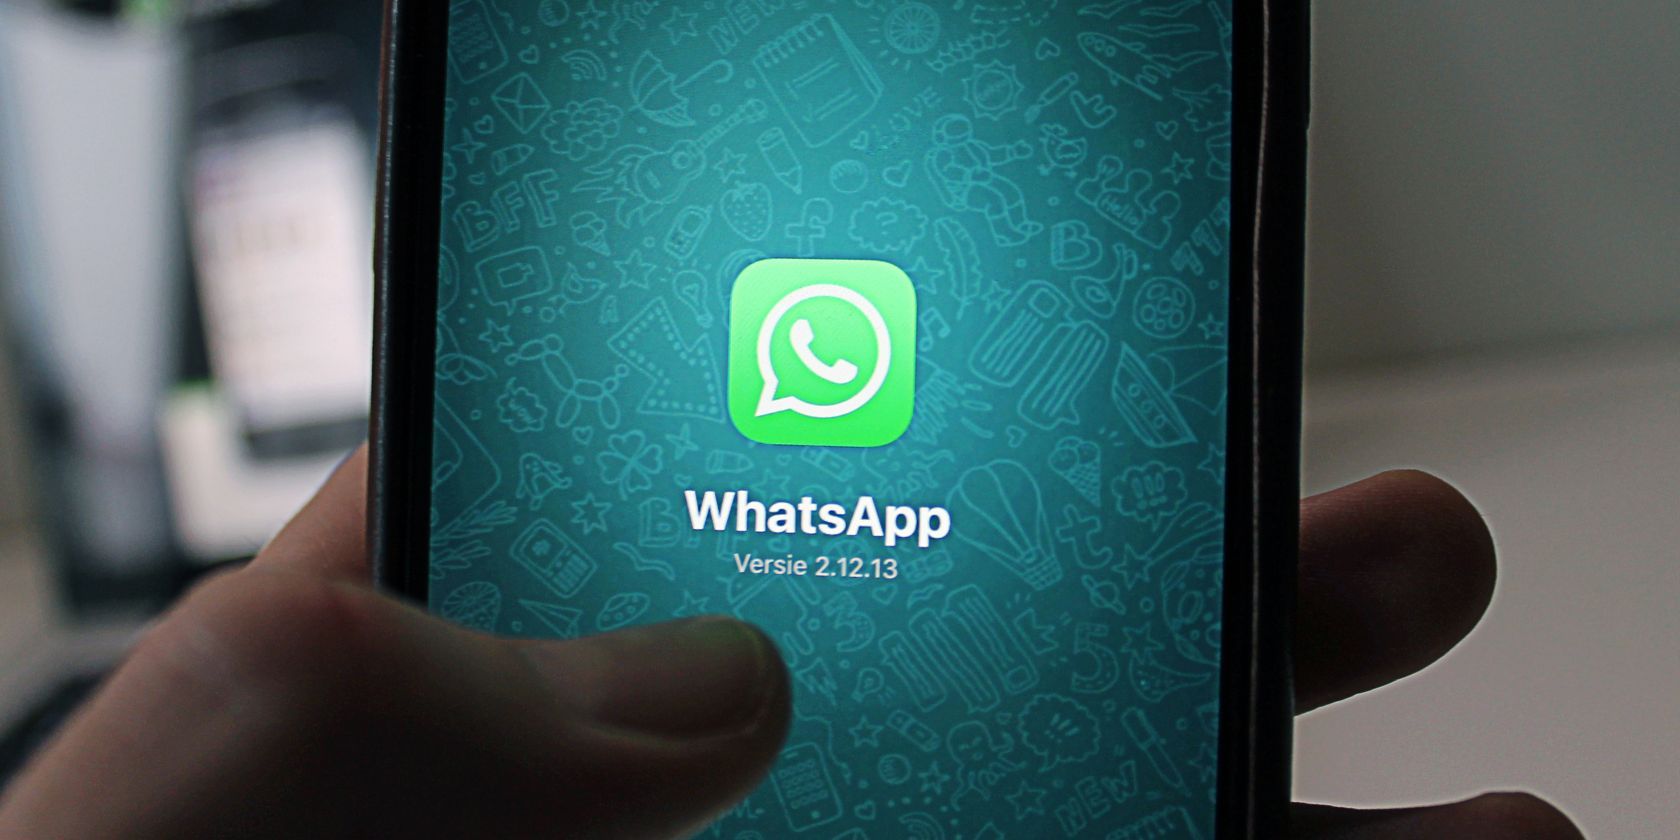 A man holding a smartphone displaying the WhatsApp logo on the screen